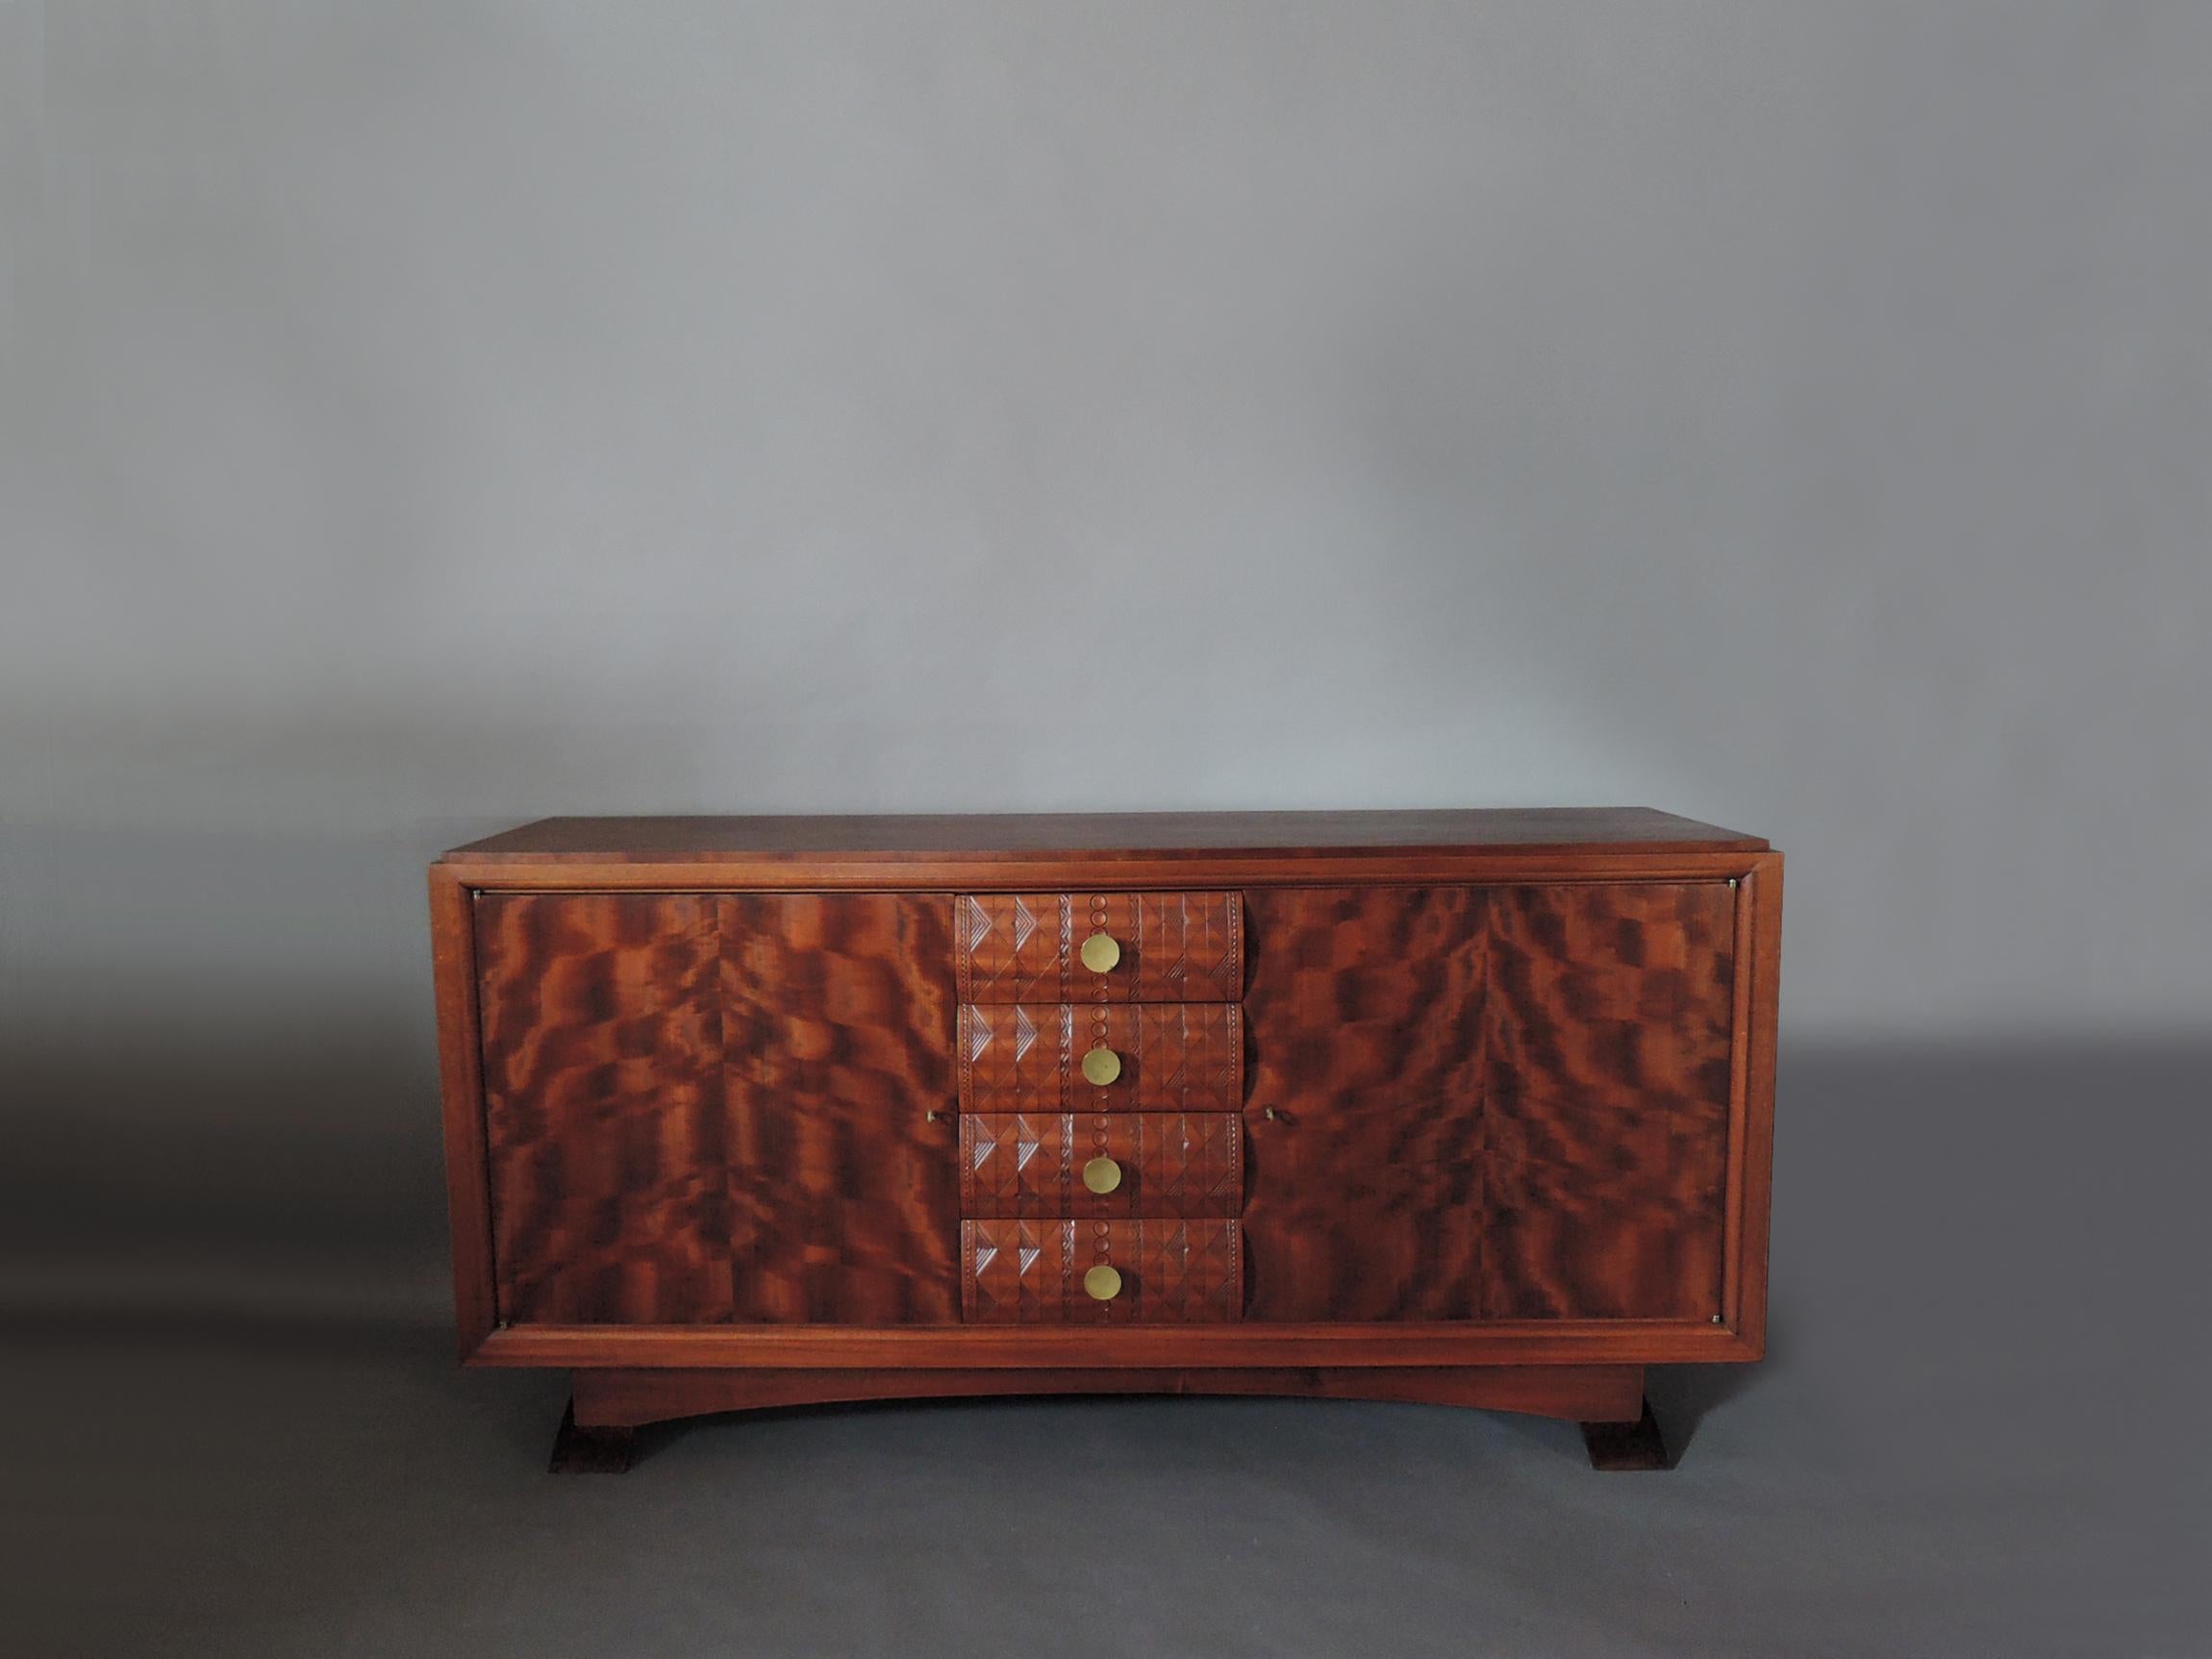 Albert-Lucien Guénot (1894-1993): A fine French Art Deco sideboard with 2 doors, 4 carved drawers, and patinated bronze legs and knobs.
Edited by 